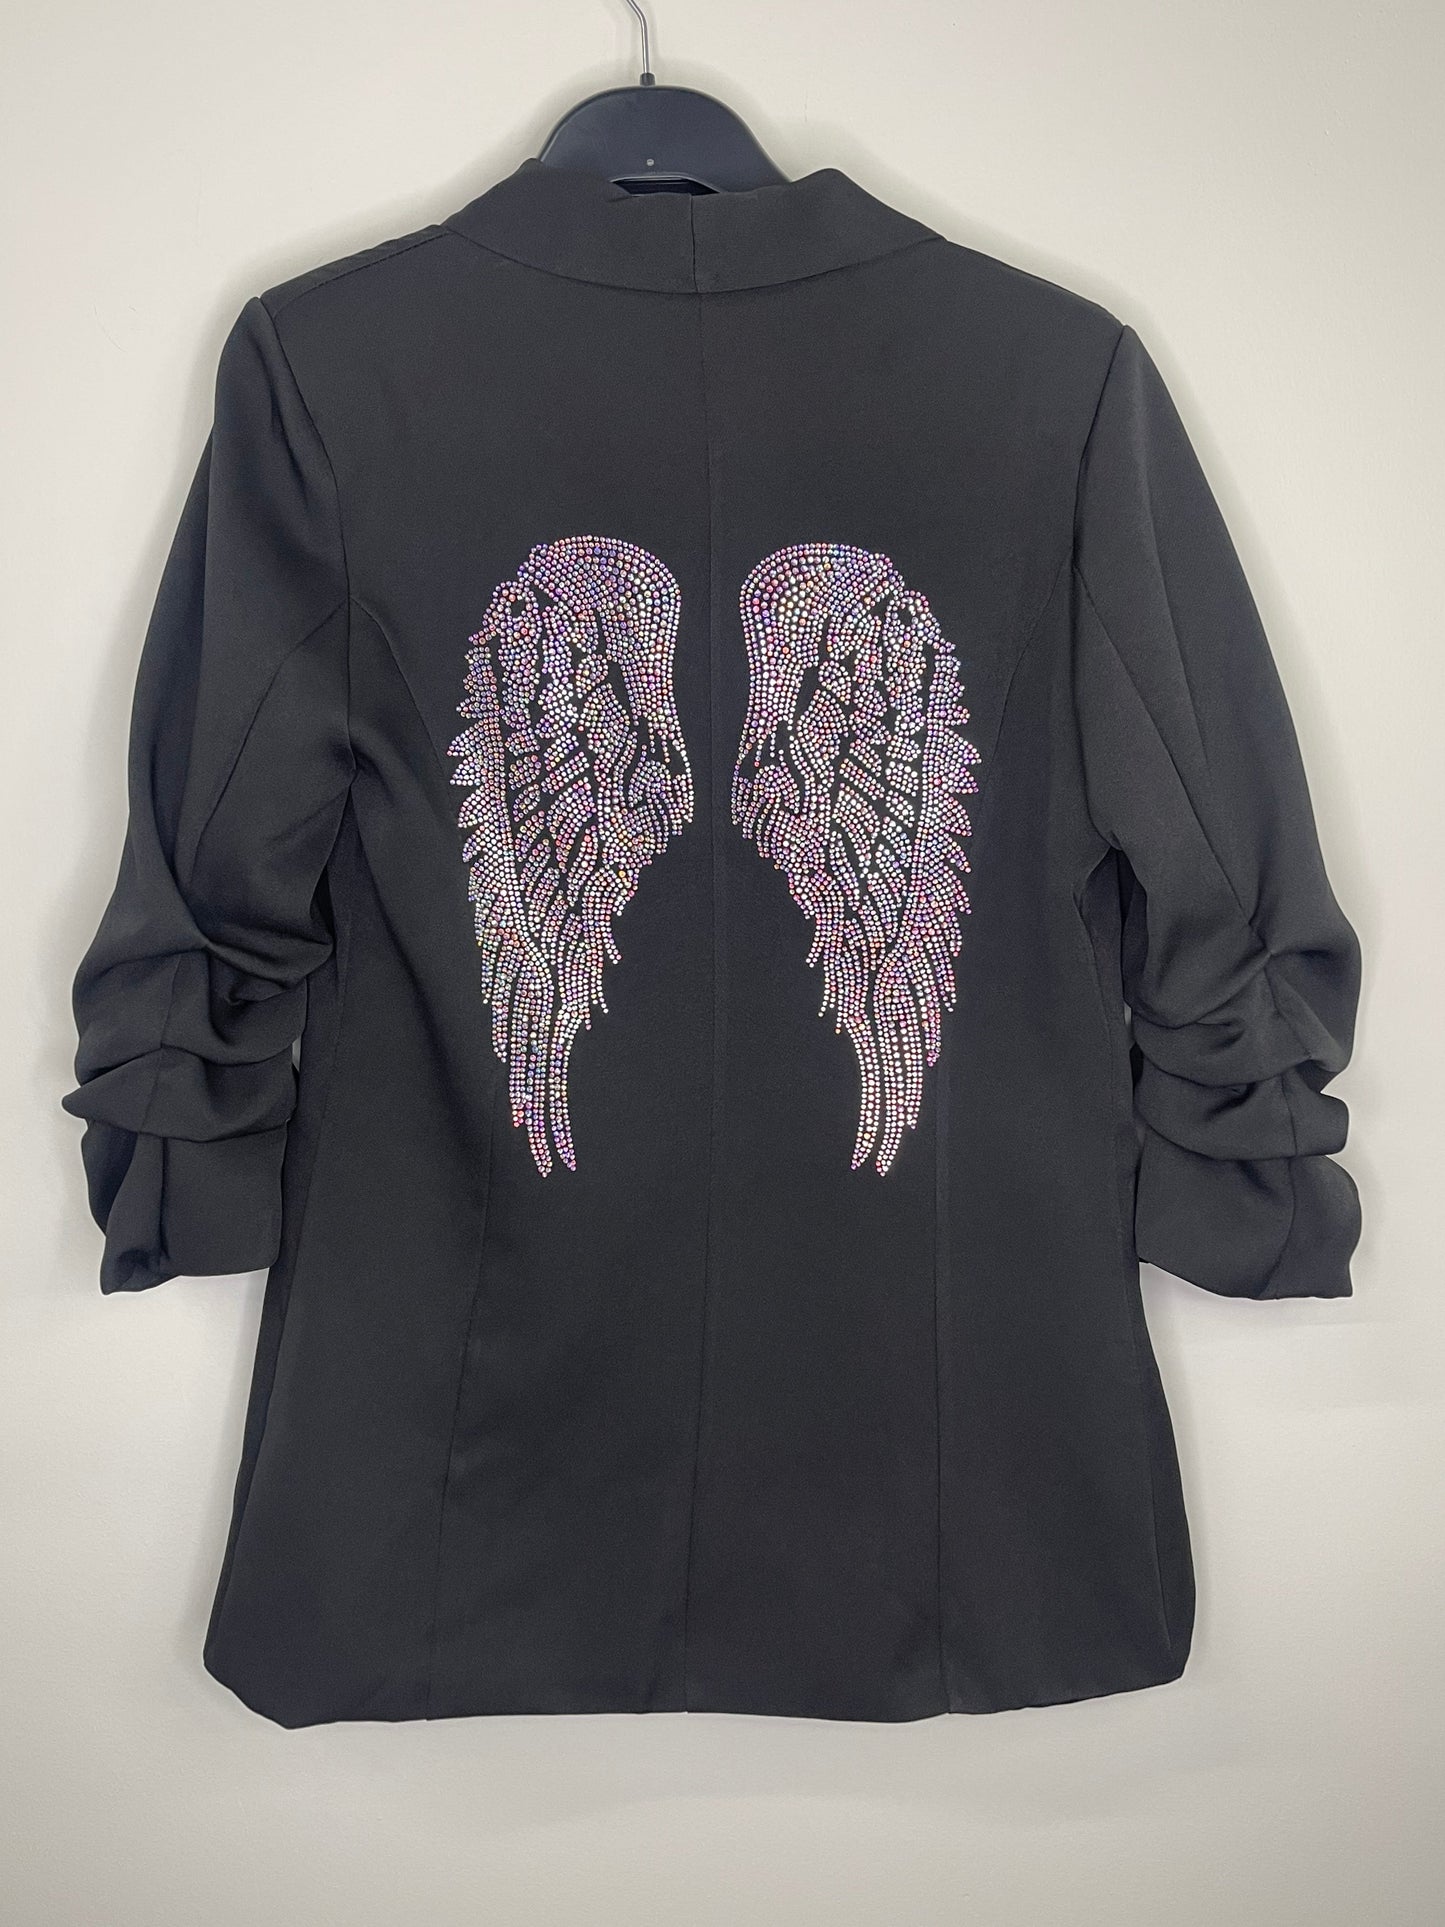 Blazer, Ruched Black, Iridescent Wings